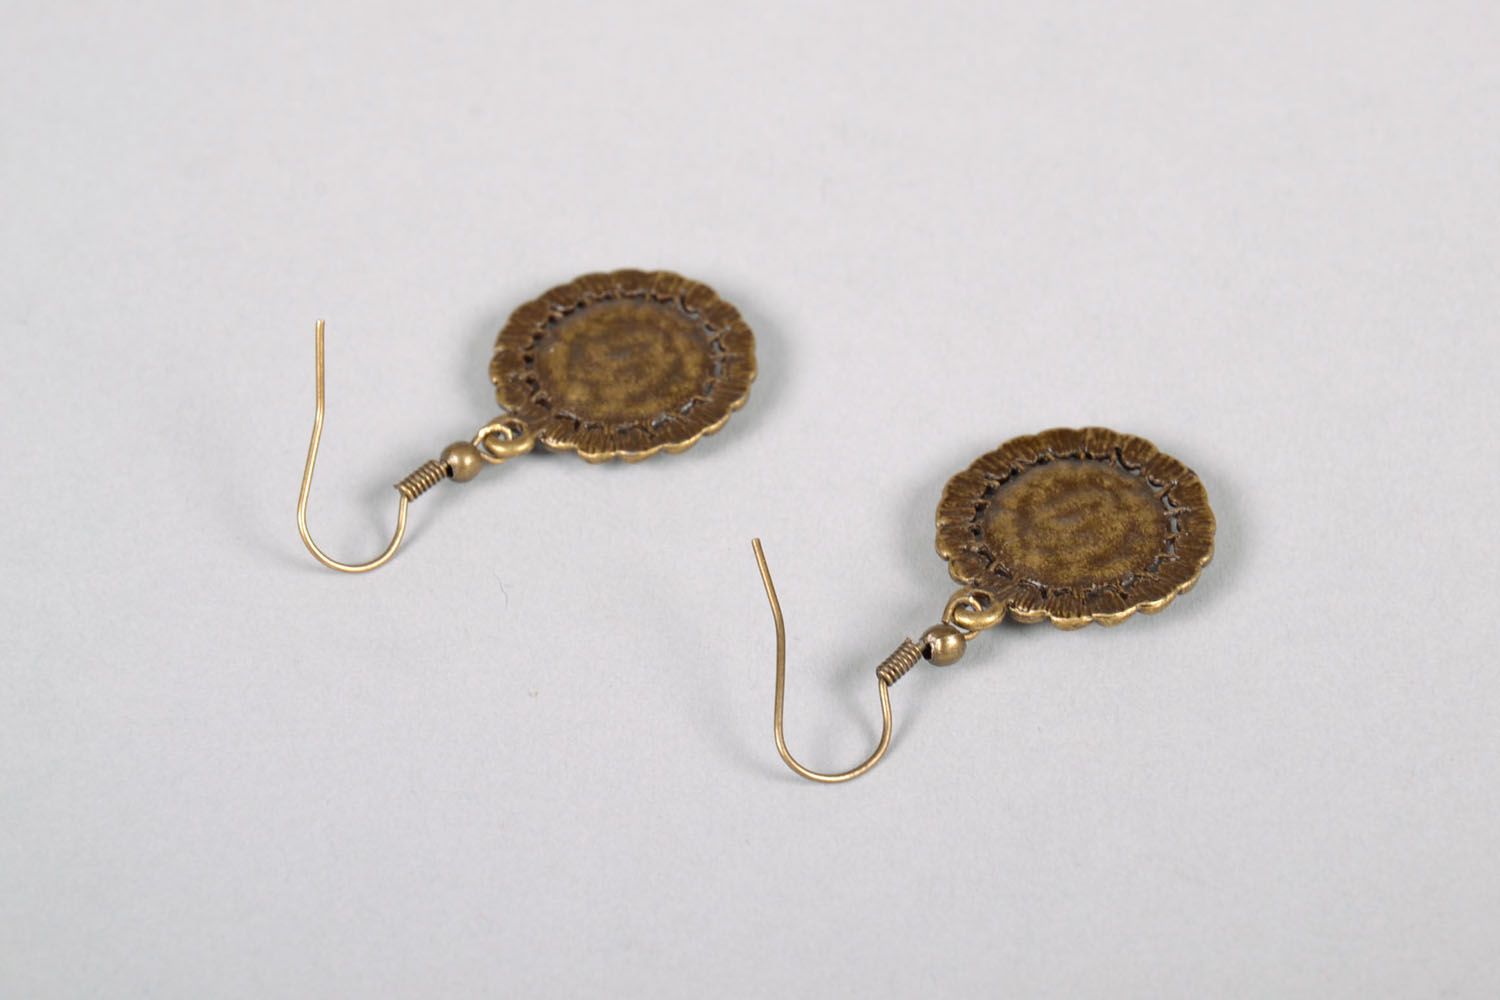 Earrings with cross stitch embroidery photo 4